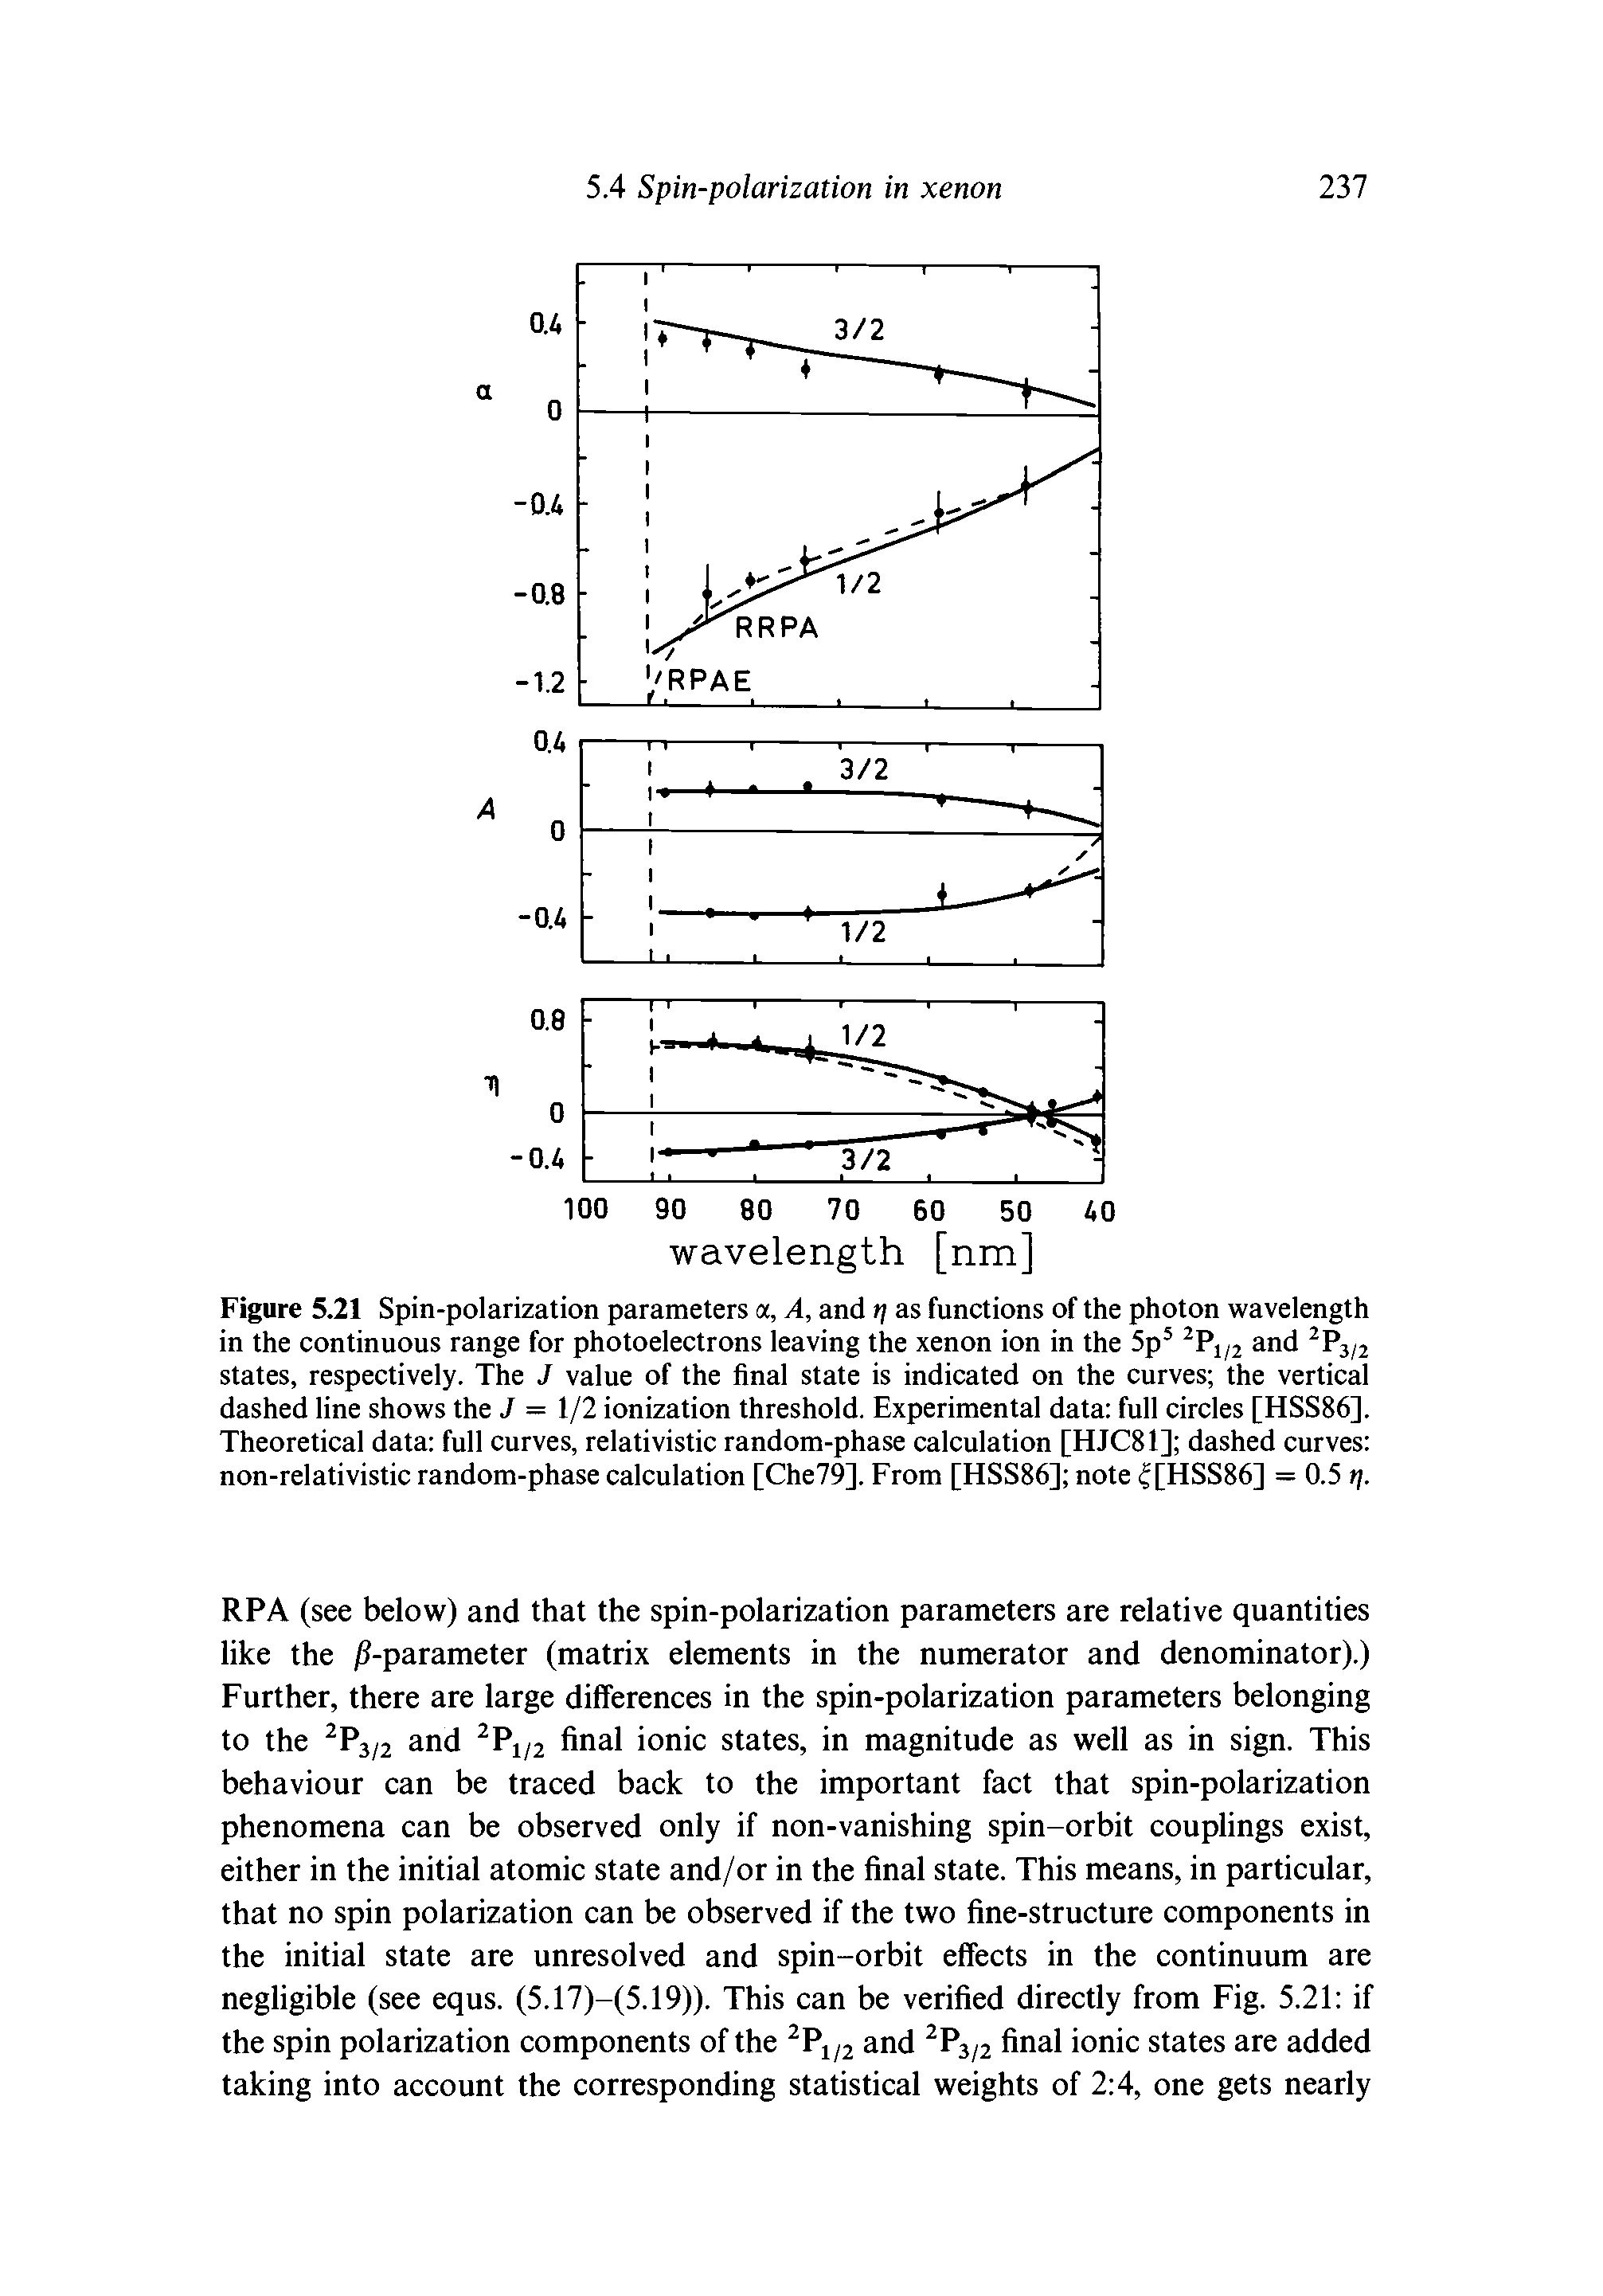 Figure 5.21 Spin-polarization parameters a, A, and tj as functions of the photon wavelength in the continuous range for photoelectrons leaving the xenon ion in the 5p5 2P1/2 and 2P3/2 states, respectively. The J value of the final state is indicated on the curves the vertical dashed line shows the J = 1/2 ionization threshold. Experimental data full circles [HSS86], Theoretical data full curves, relativistic random-phase calculation [HJC81] dashed curves non-relativistic random-phase calculation [Che79], From [HSS86] note /[HSS86] = 0.5 rj.